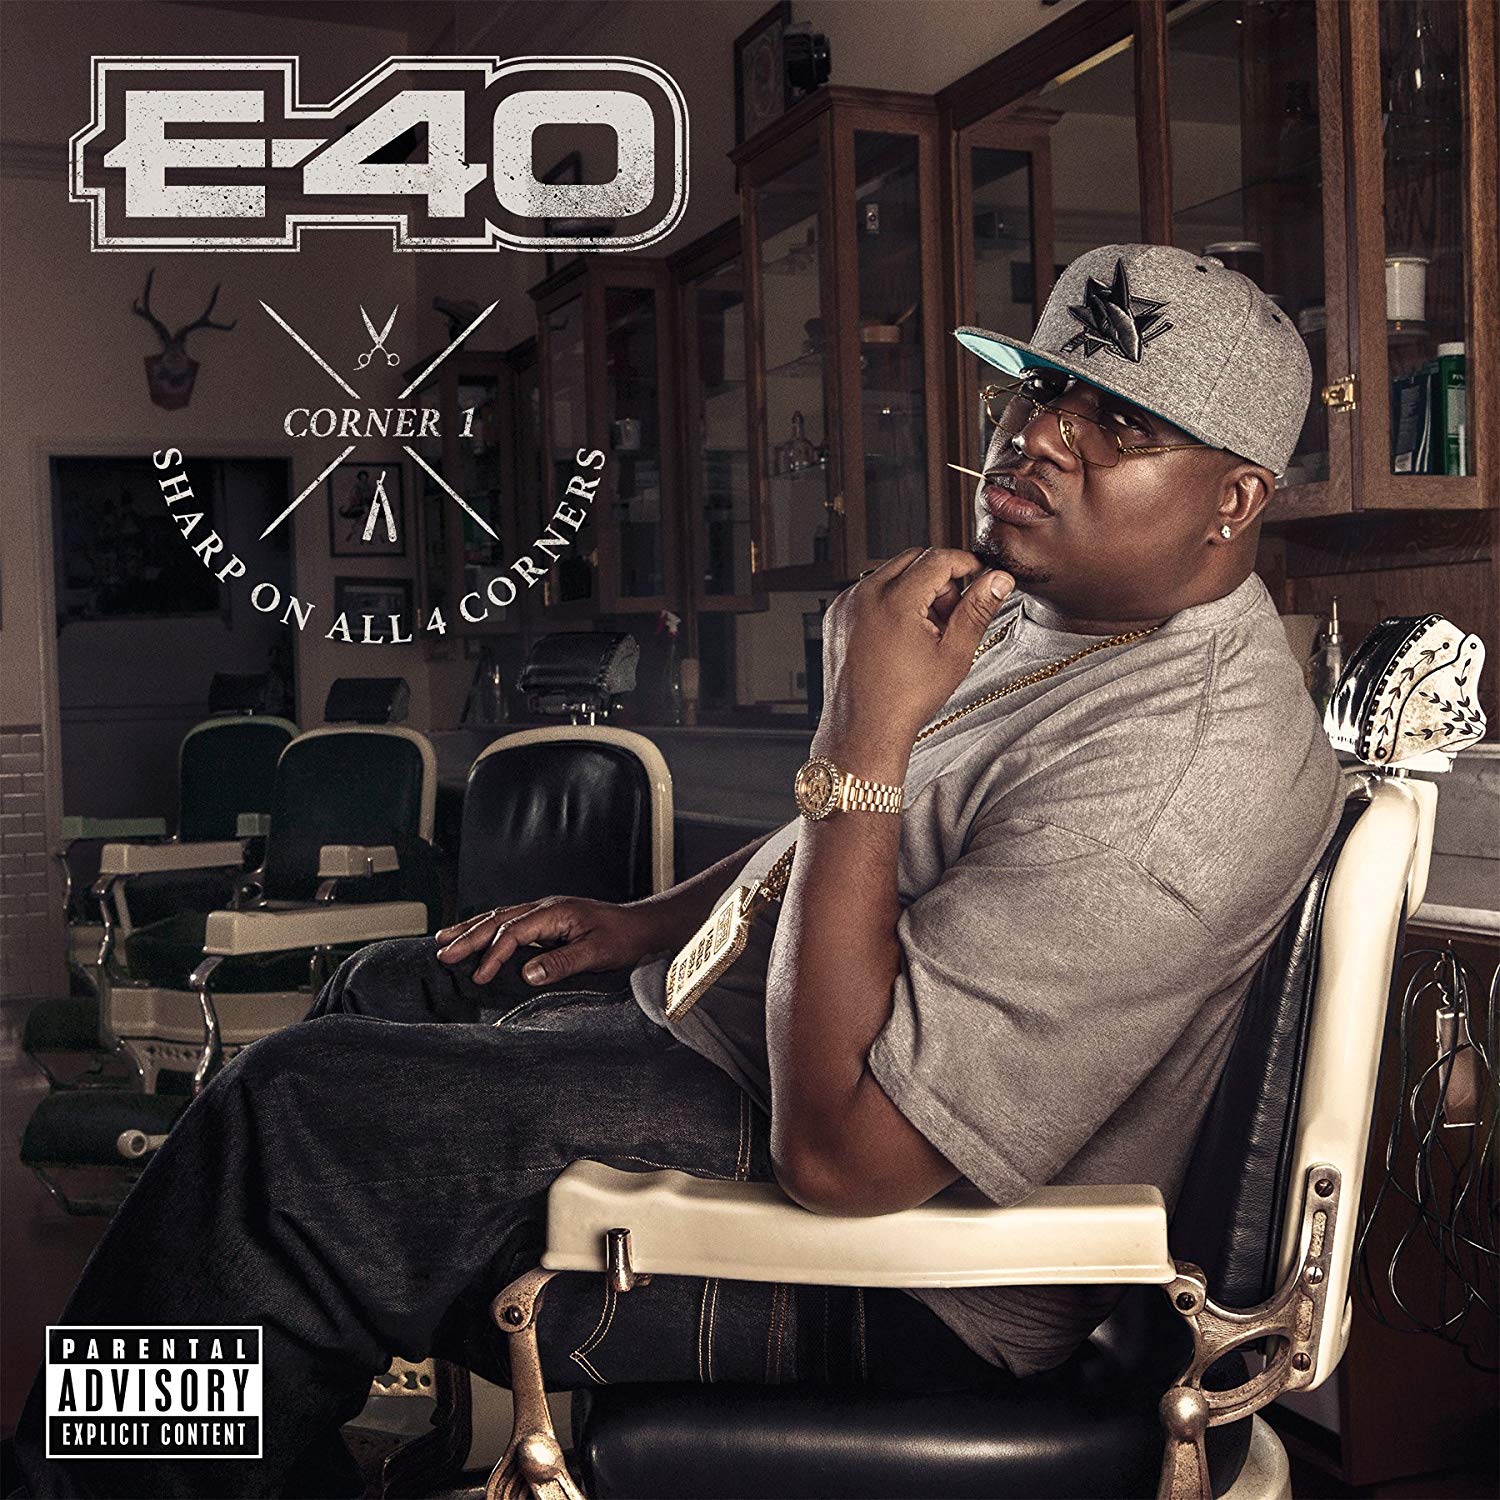 audio review : Sharp On All 4 Corners [ 1 + 2 ] ( albums ) ... E-40